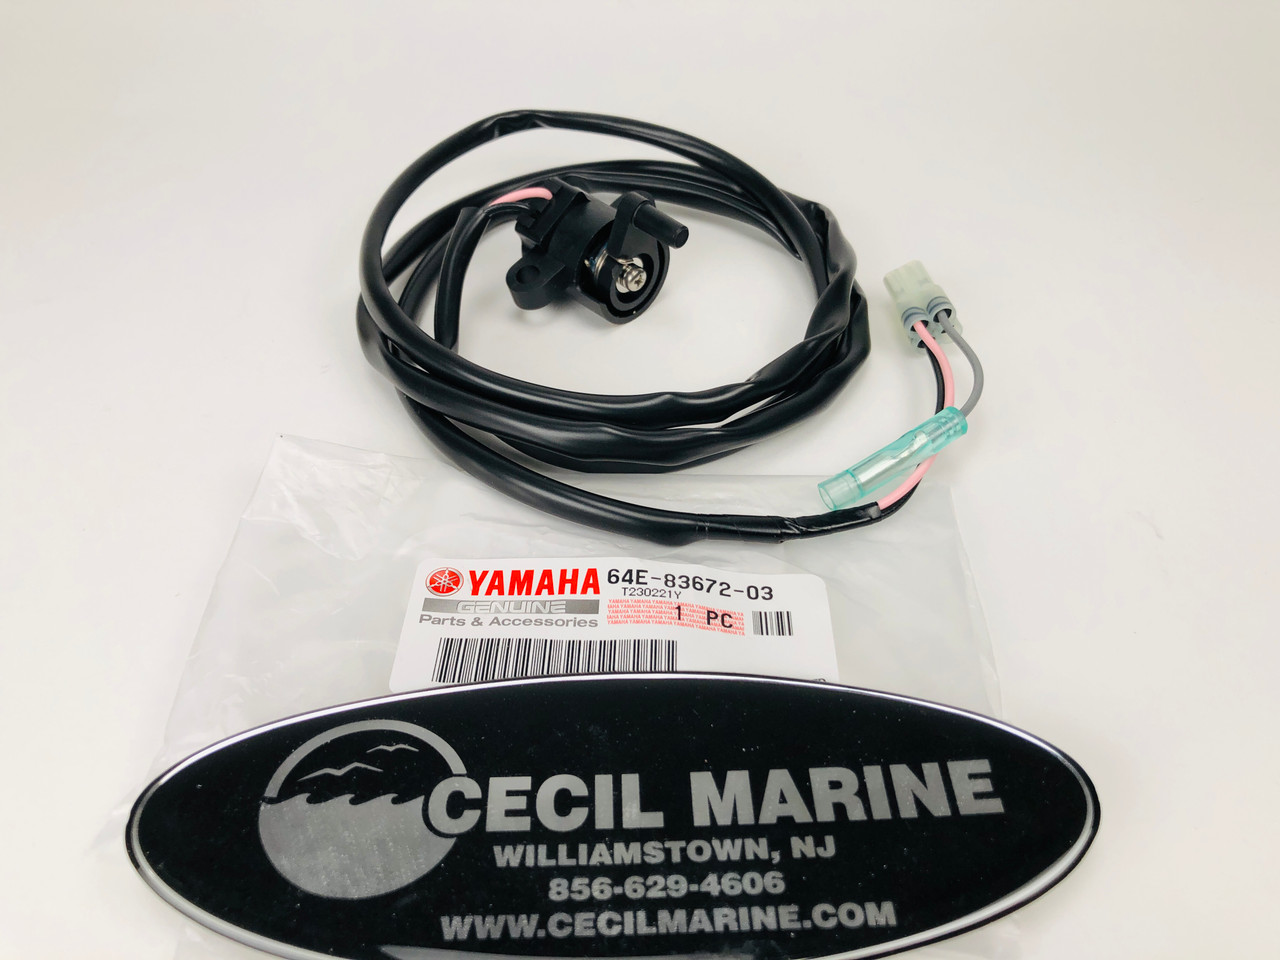 $179.99* GENUINE YAMAHA TRIM SENDER no tax* 64E-83672-03-00 *In Stock And Ready To Ship!